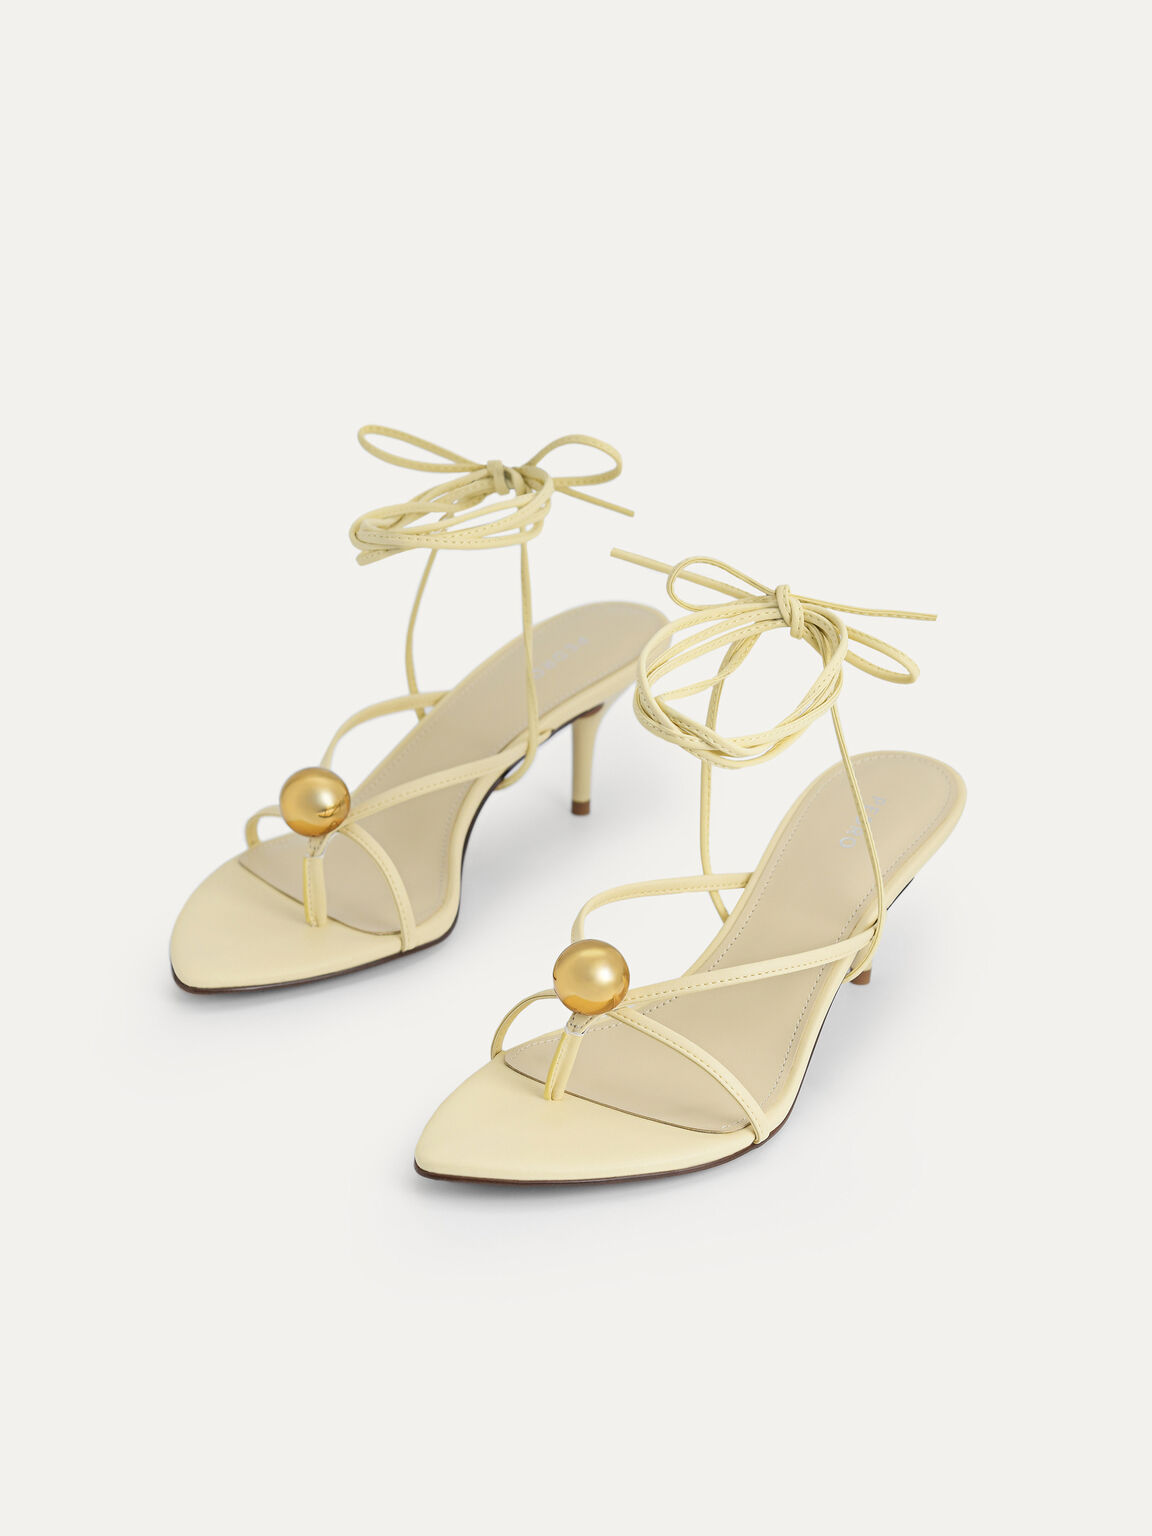 Orb Lace-Up Heel Sandals, Light Yellow